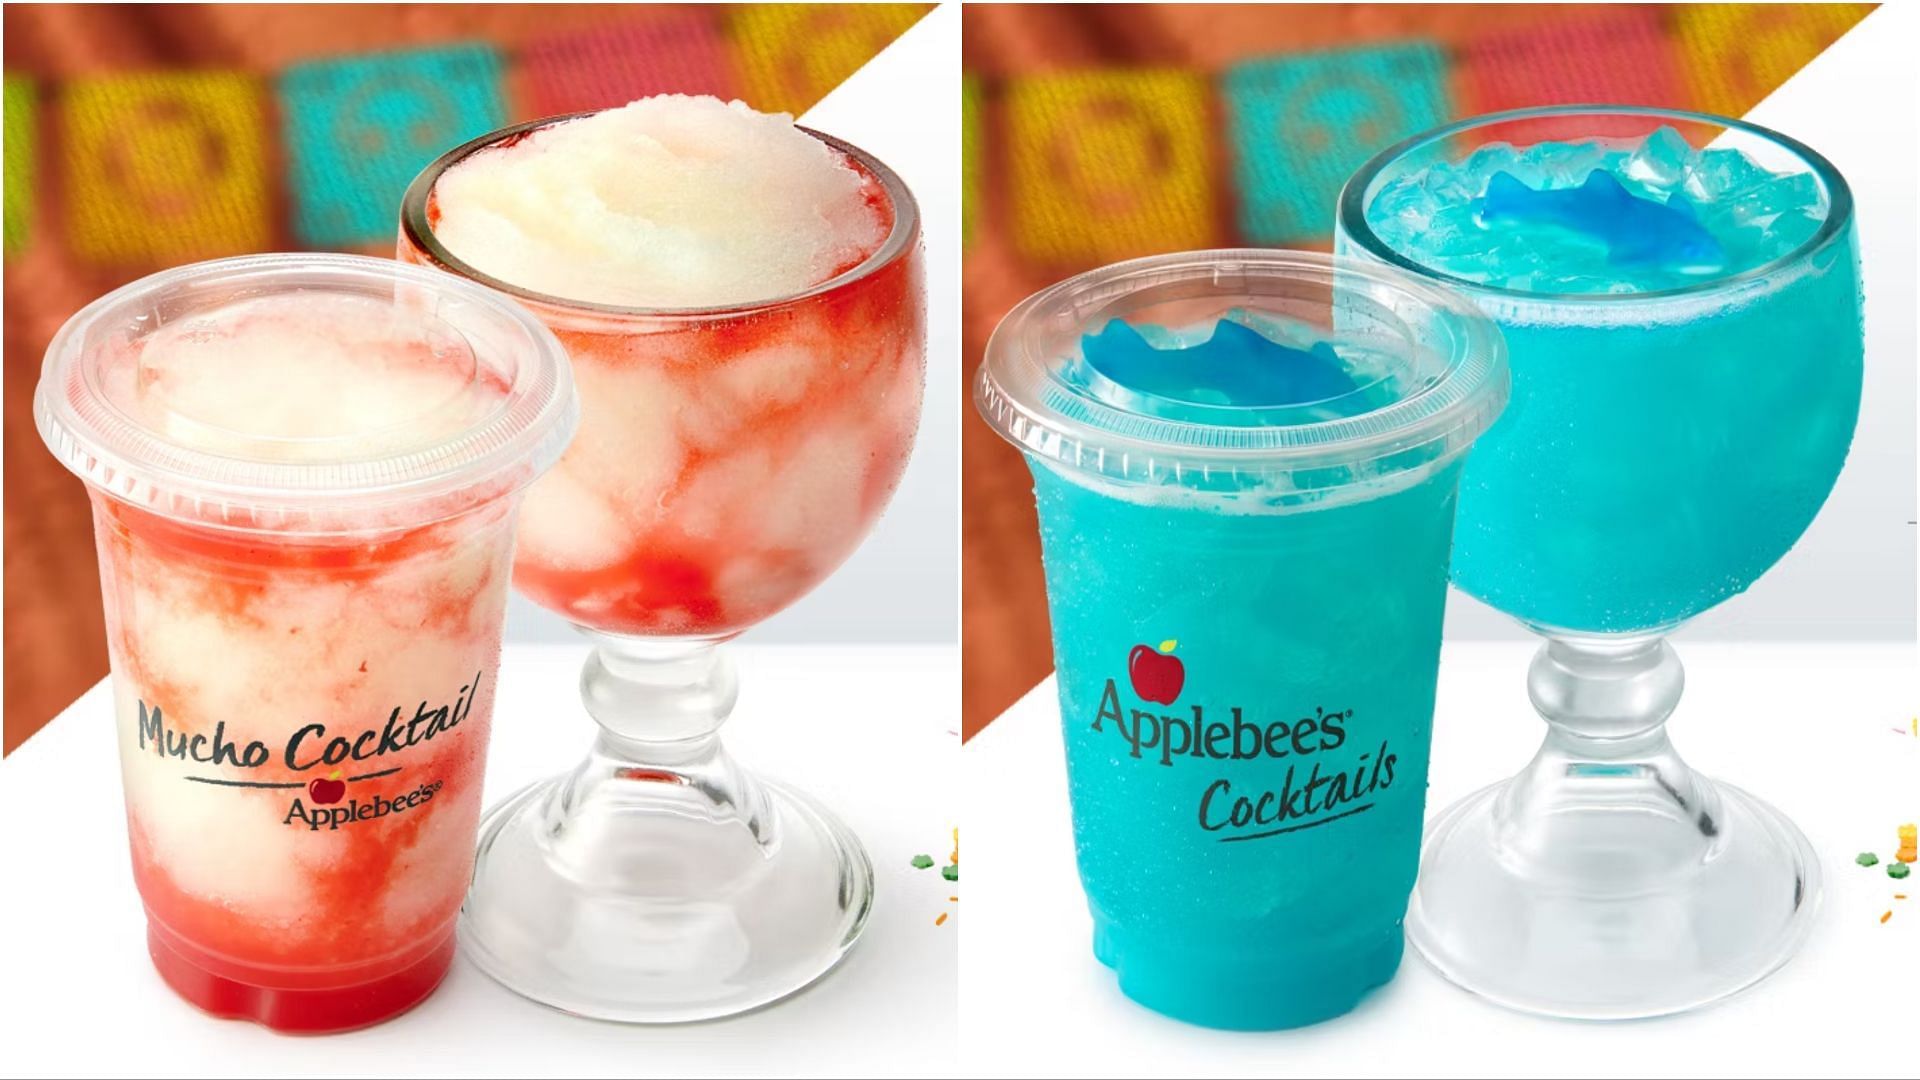 The Tipsy Shark and the new Strawberry Daq-a-Rita drinks from the $6 Creveza &amp; Sips line-up (Image via Applebee&rsquo;s)